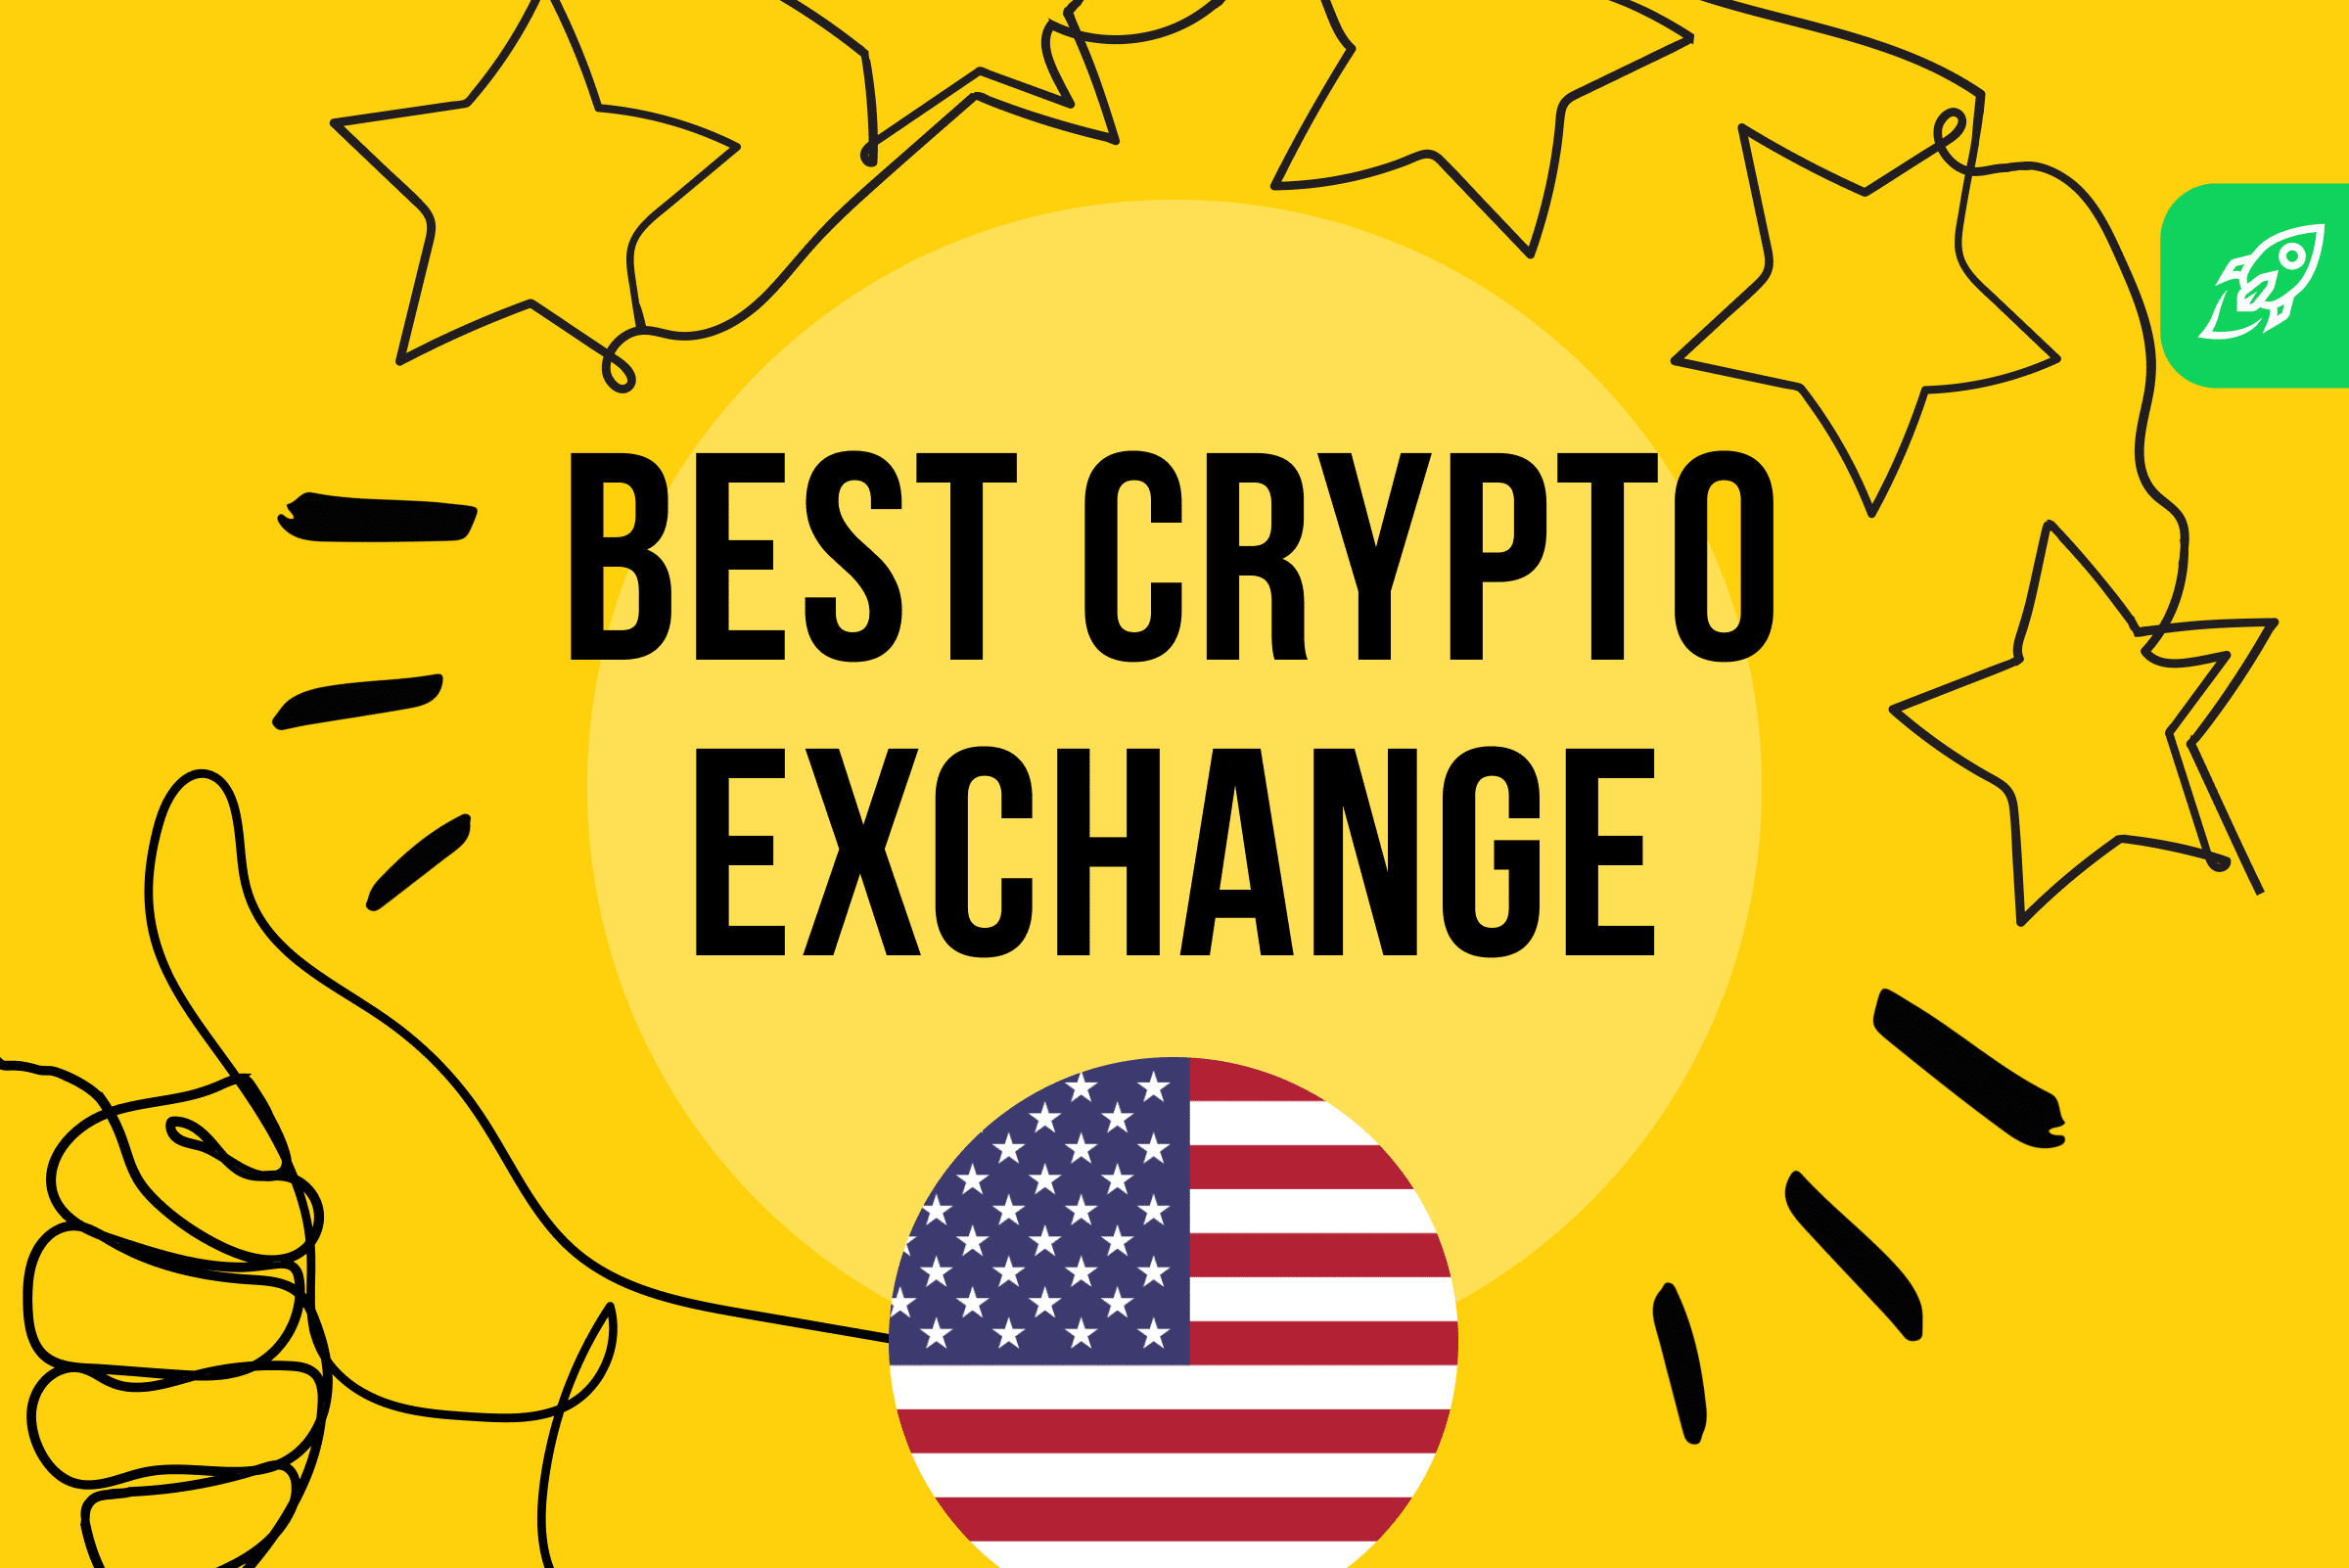 how many crypto trading exchanges are there in the usa